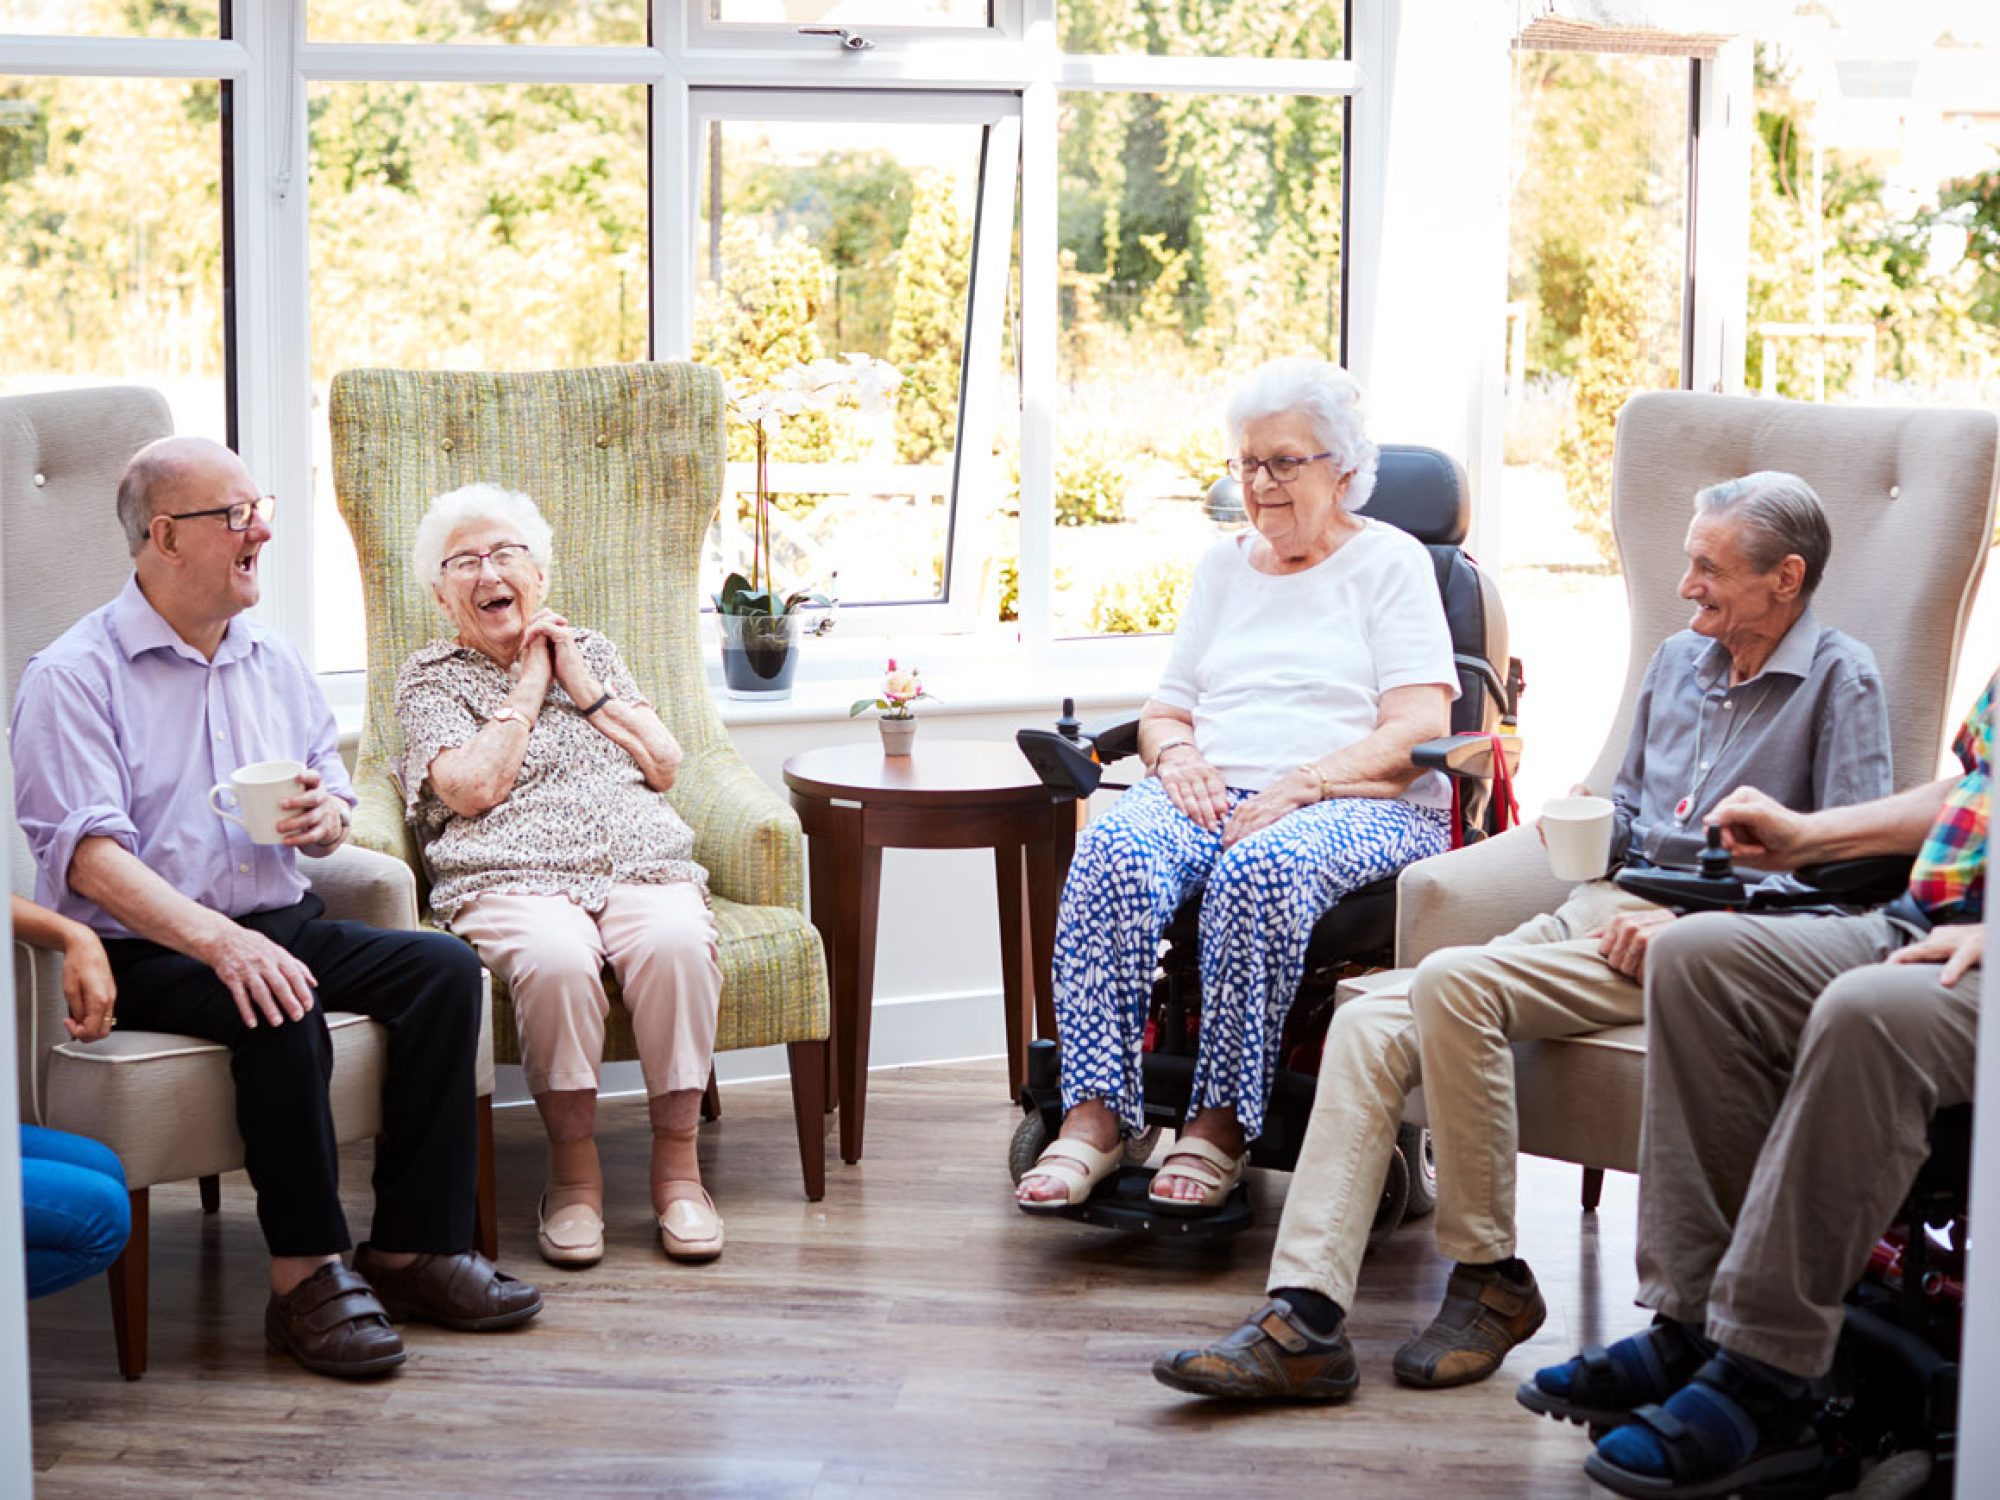 A group of older people sitting together and looking happy